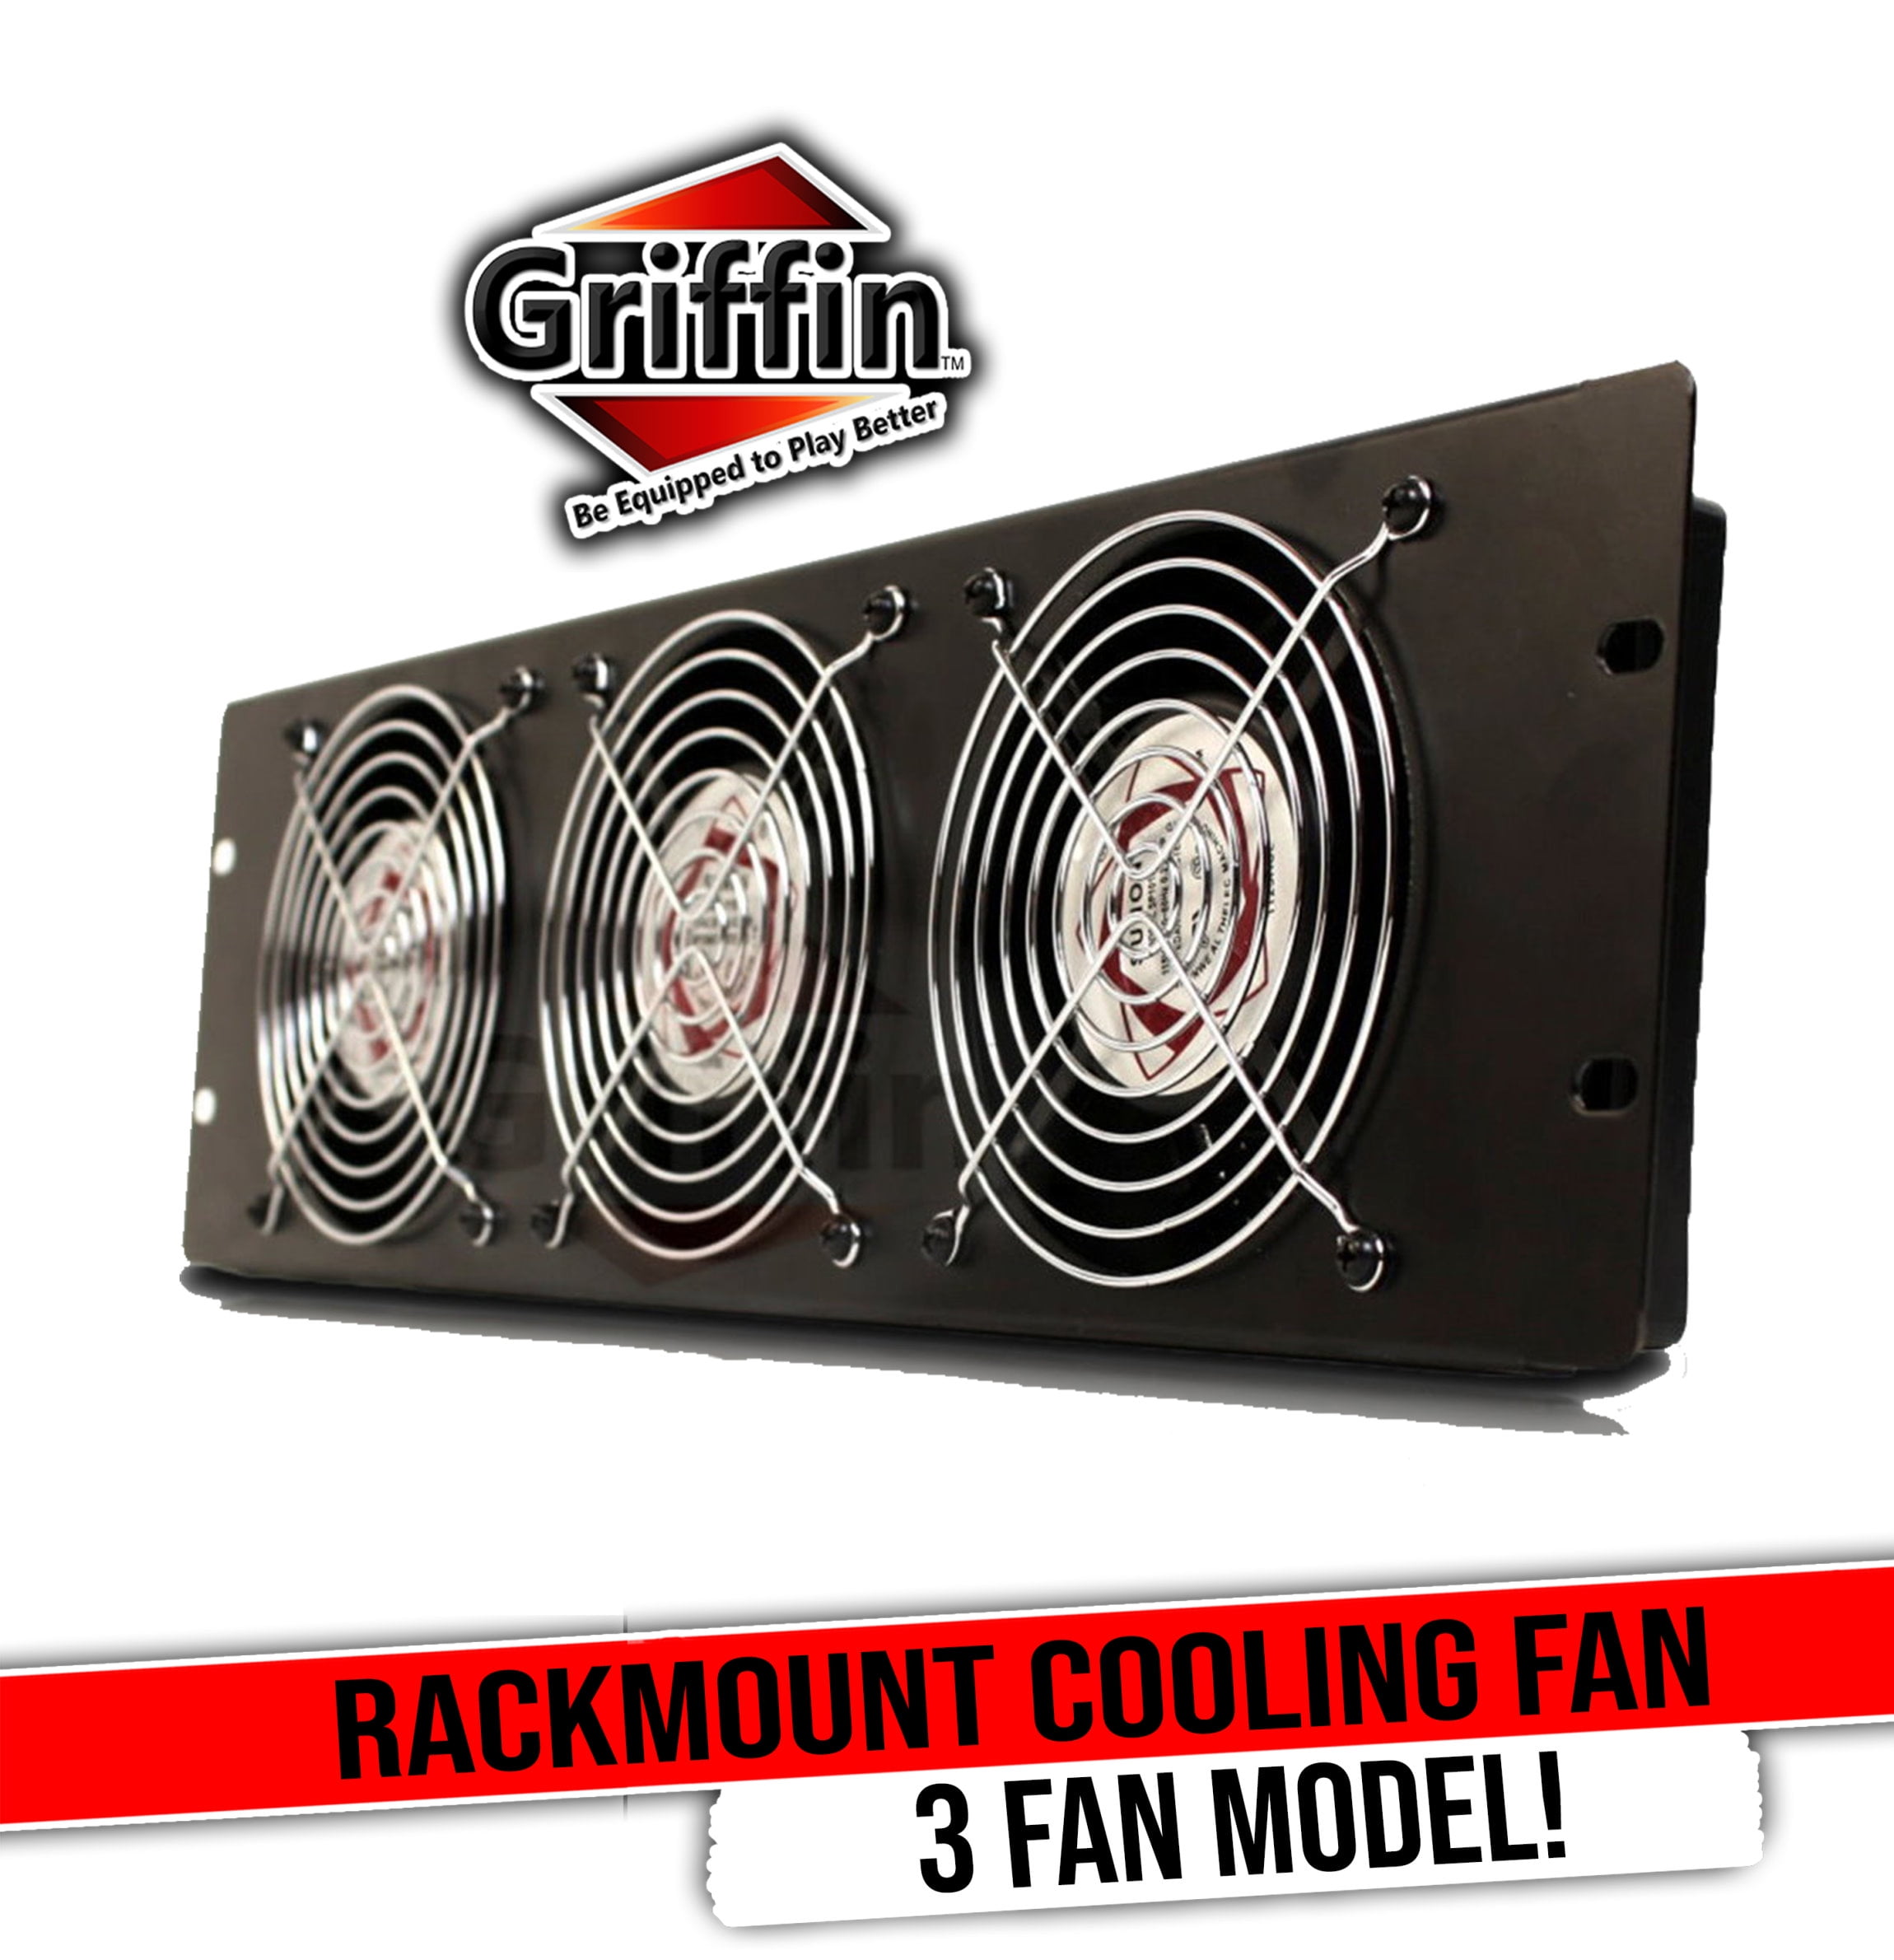 Rackmount Exhaust Cooling Fan by Griffin - 3U Ultra-Quiet Triple Fans - Keep Studio Equipment Cool Rack on Network IT Server - UL Approved Temperature Control Panel for DJ